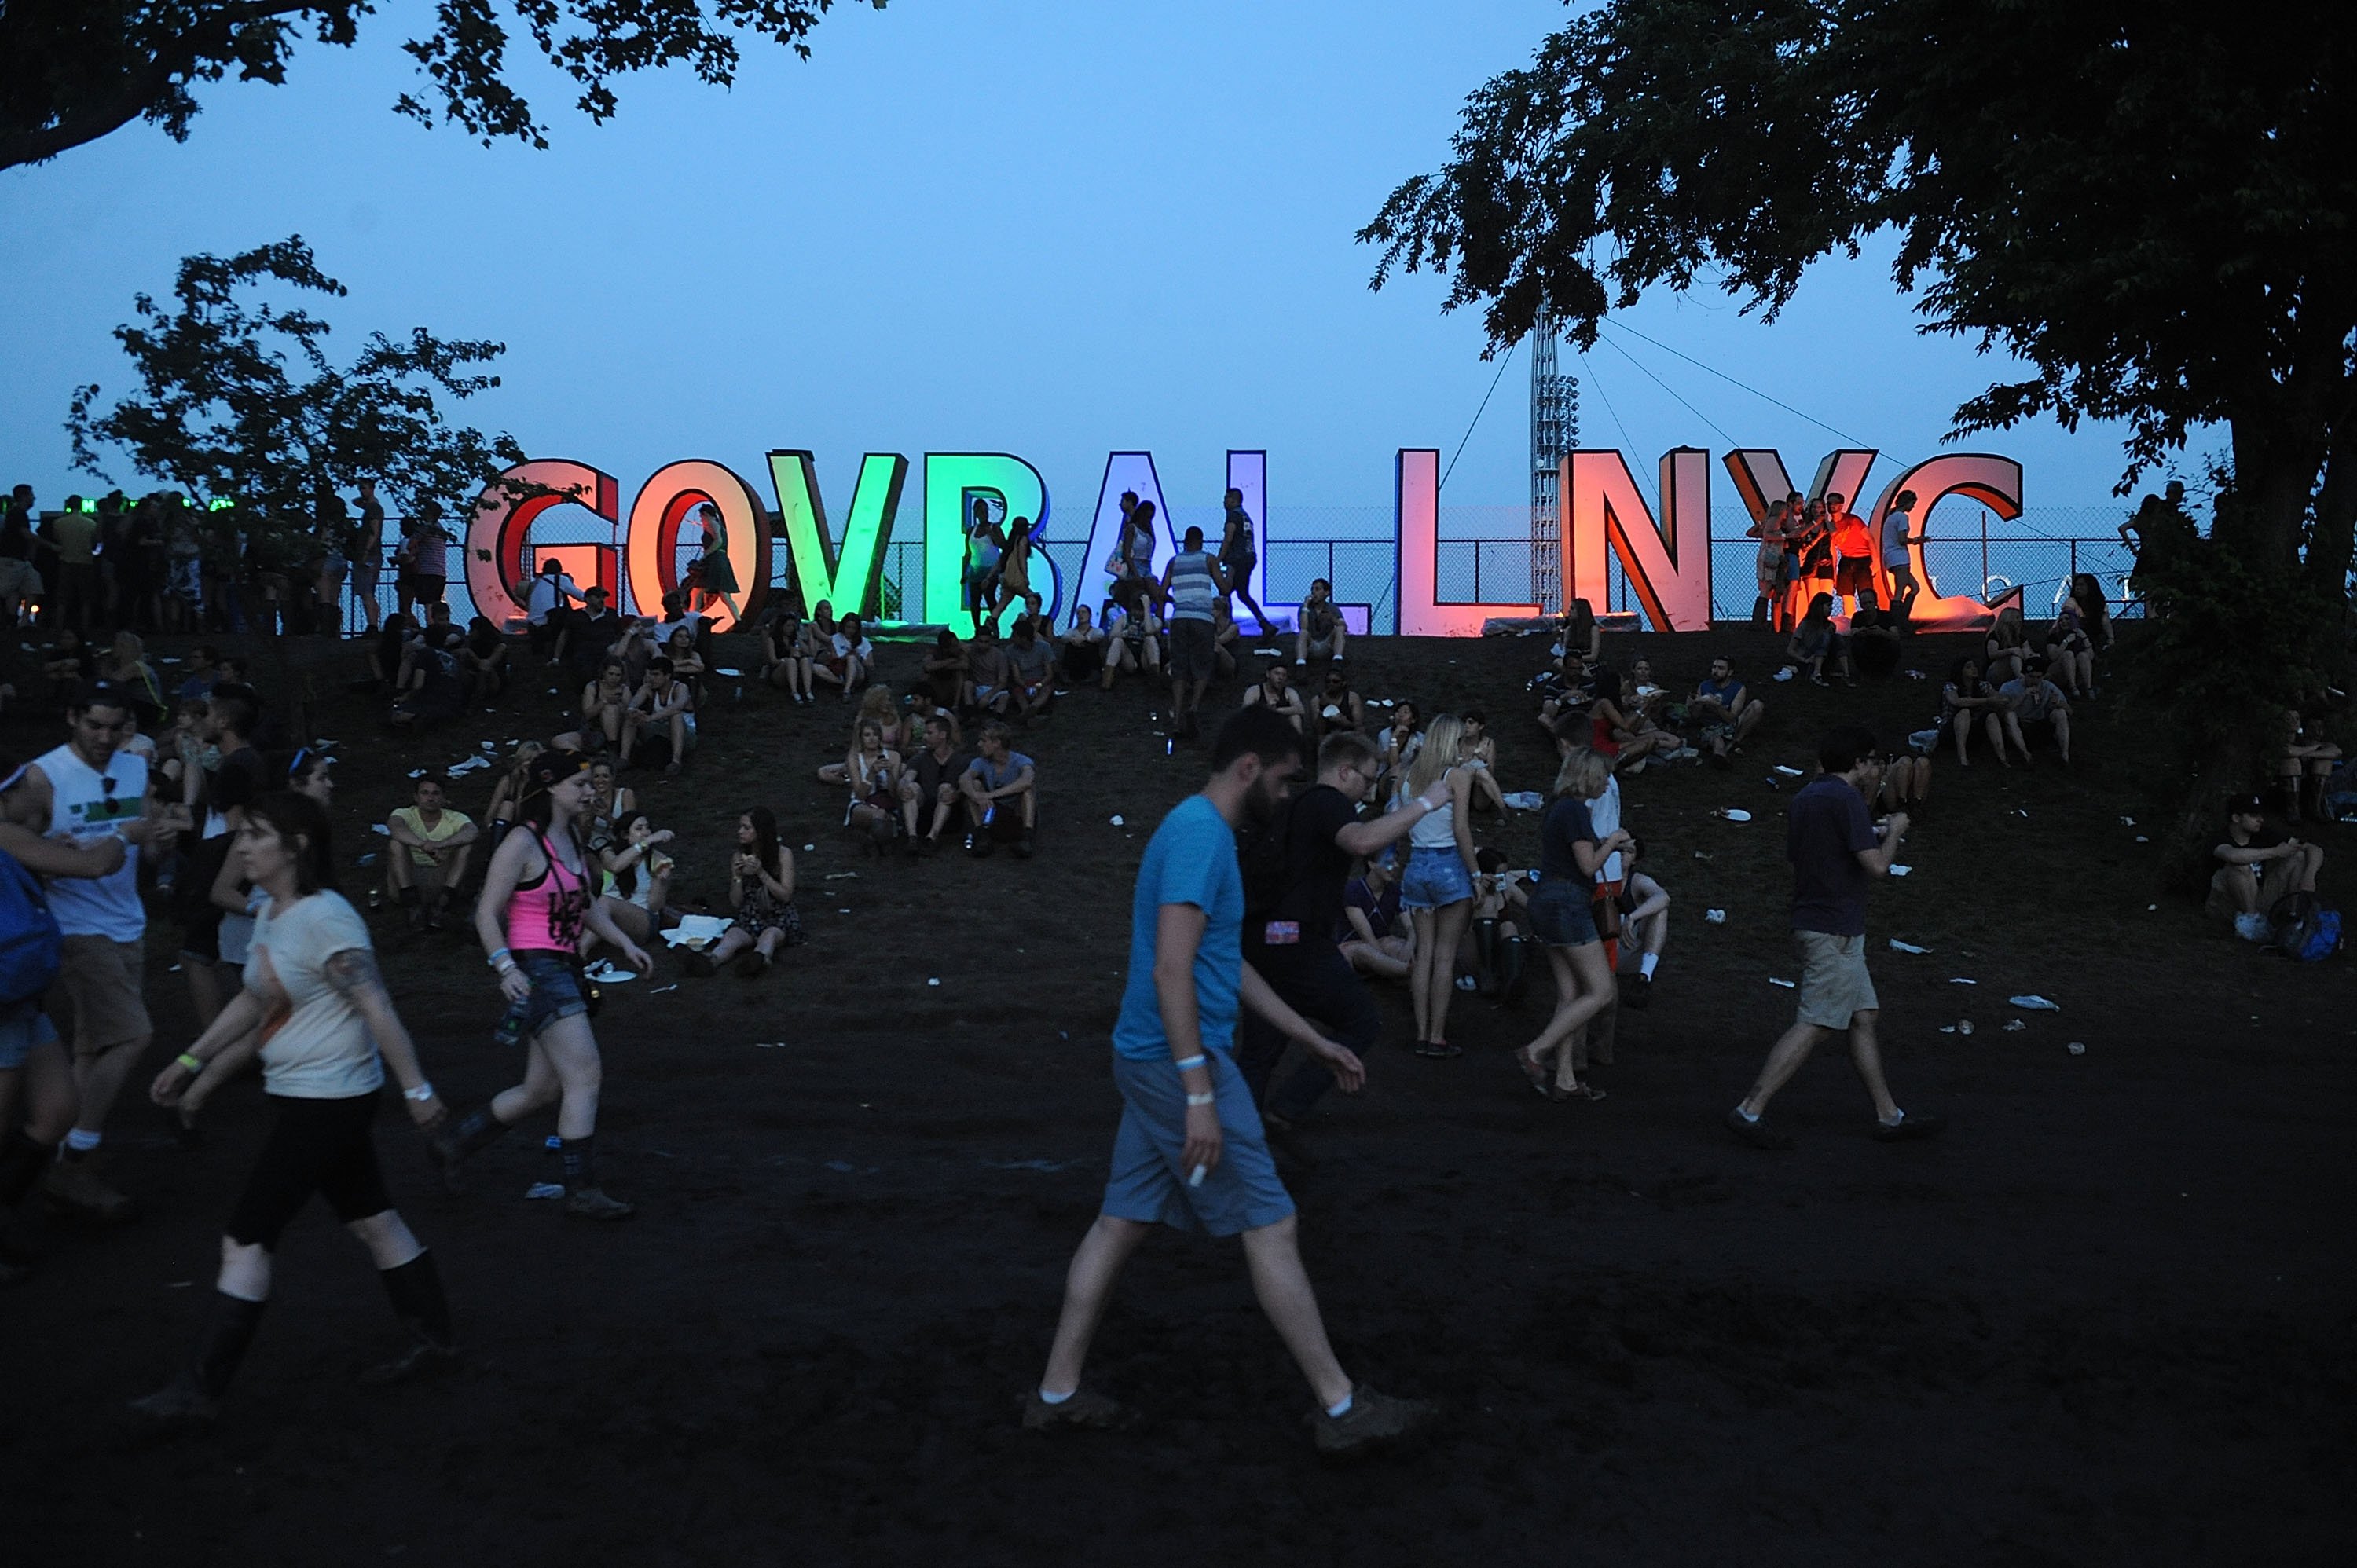 Overview of the SKYY Vodka Stage at Governors Ball - Day 3 at Randall's Island |